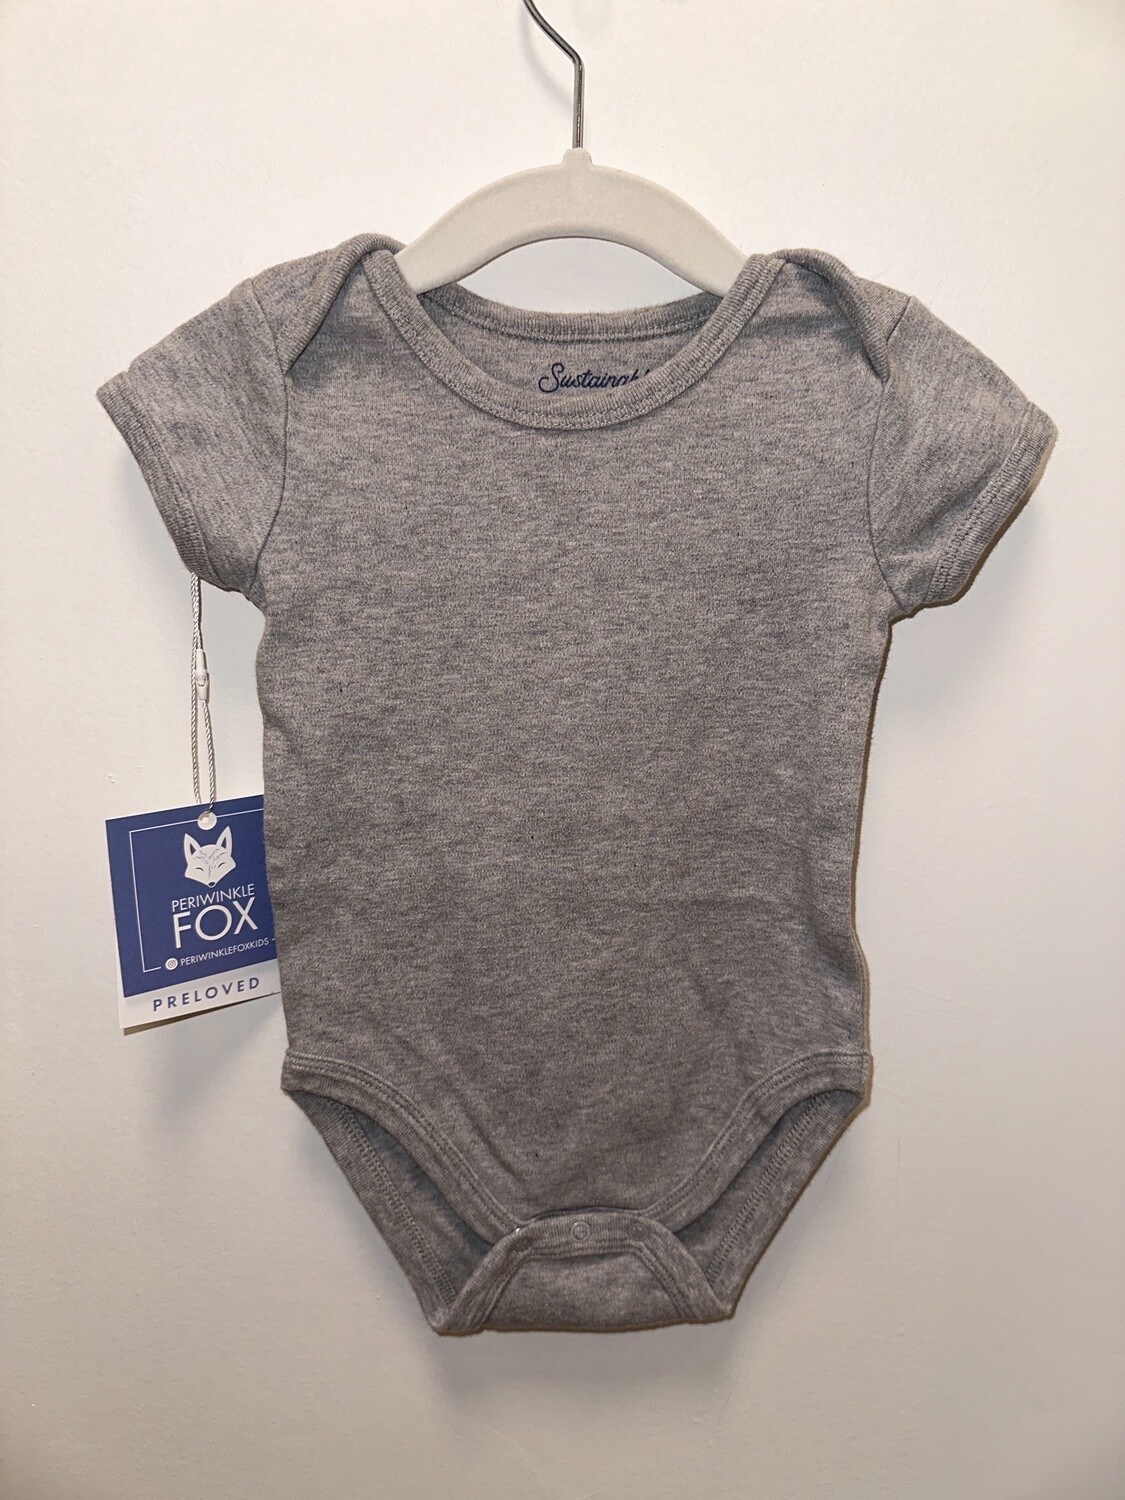 Used - Pact - Short Sleeve - 6-9 Months - PWE689